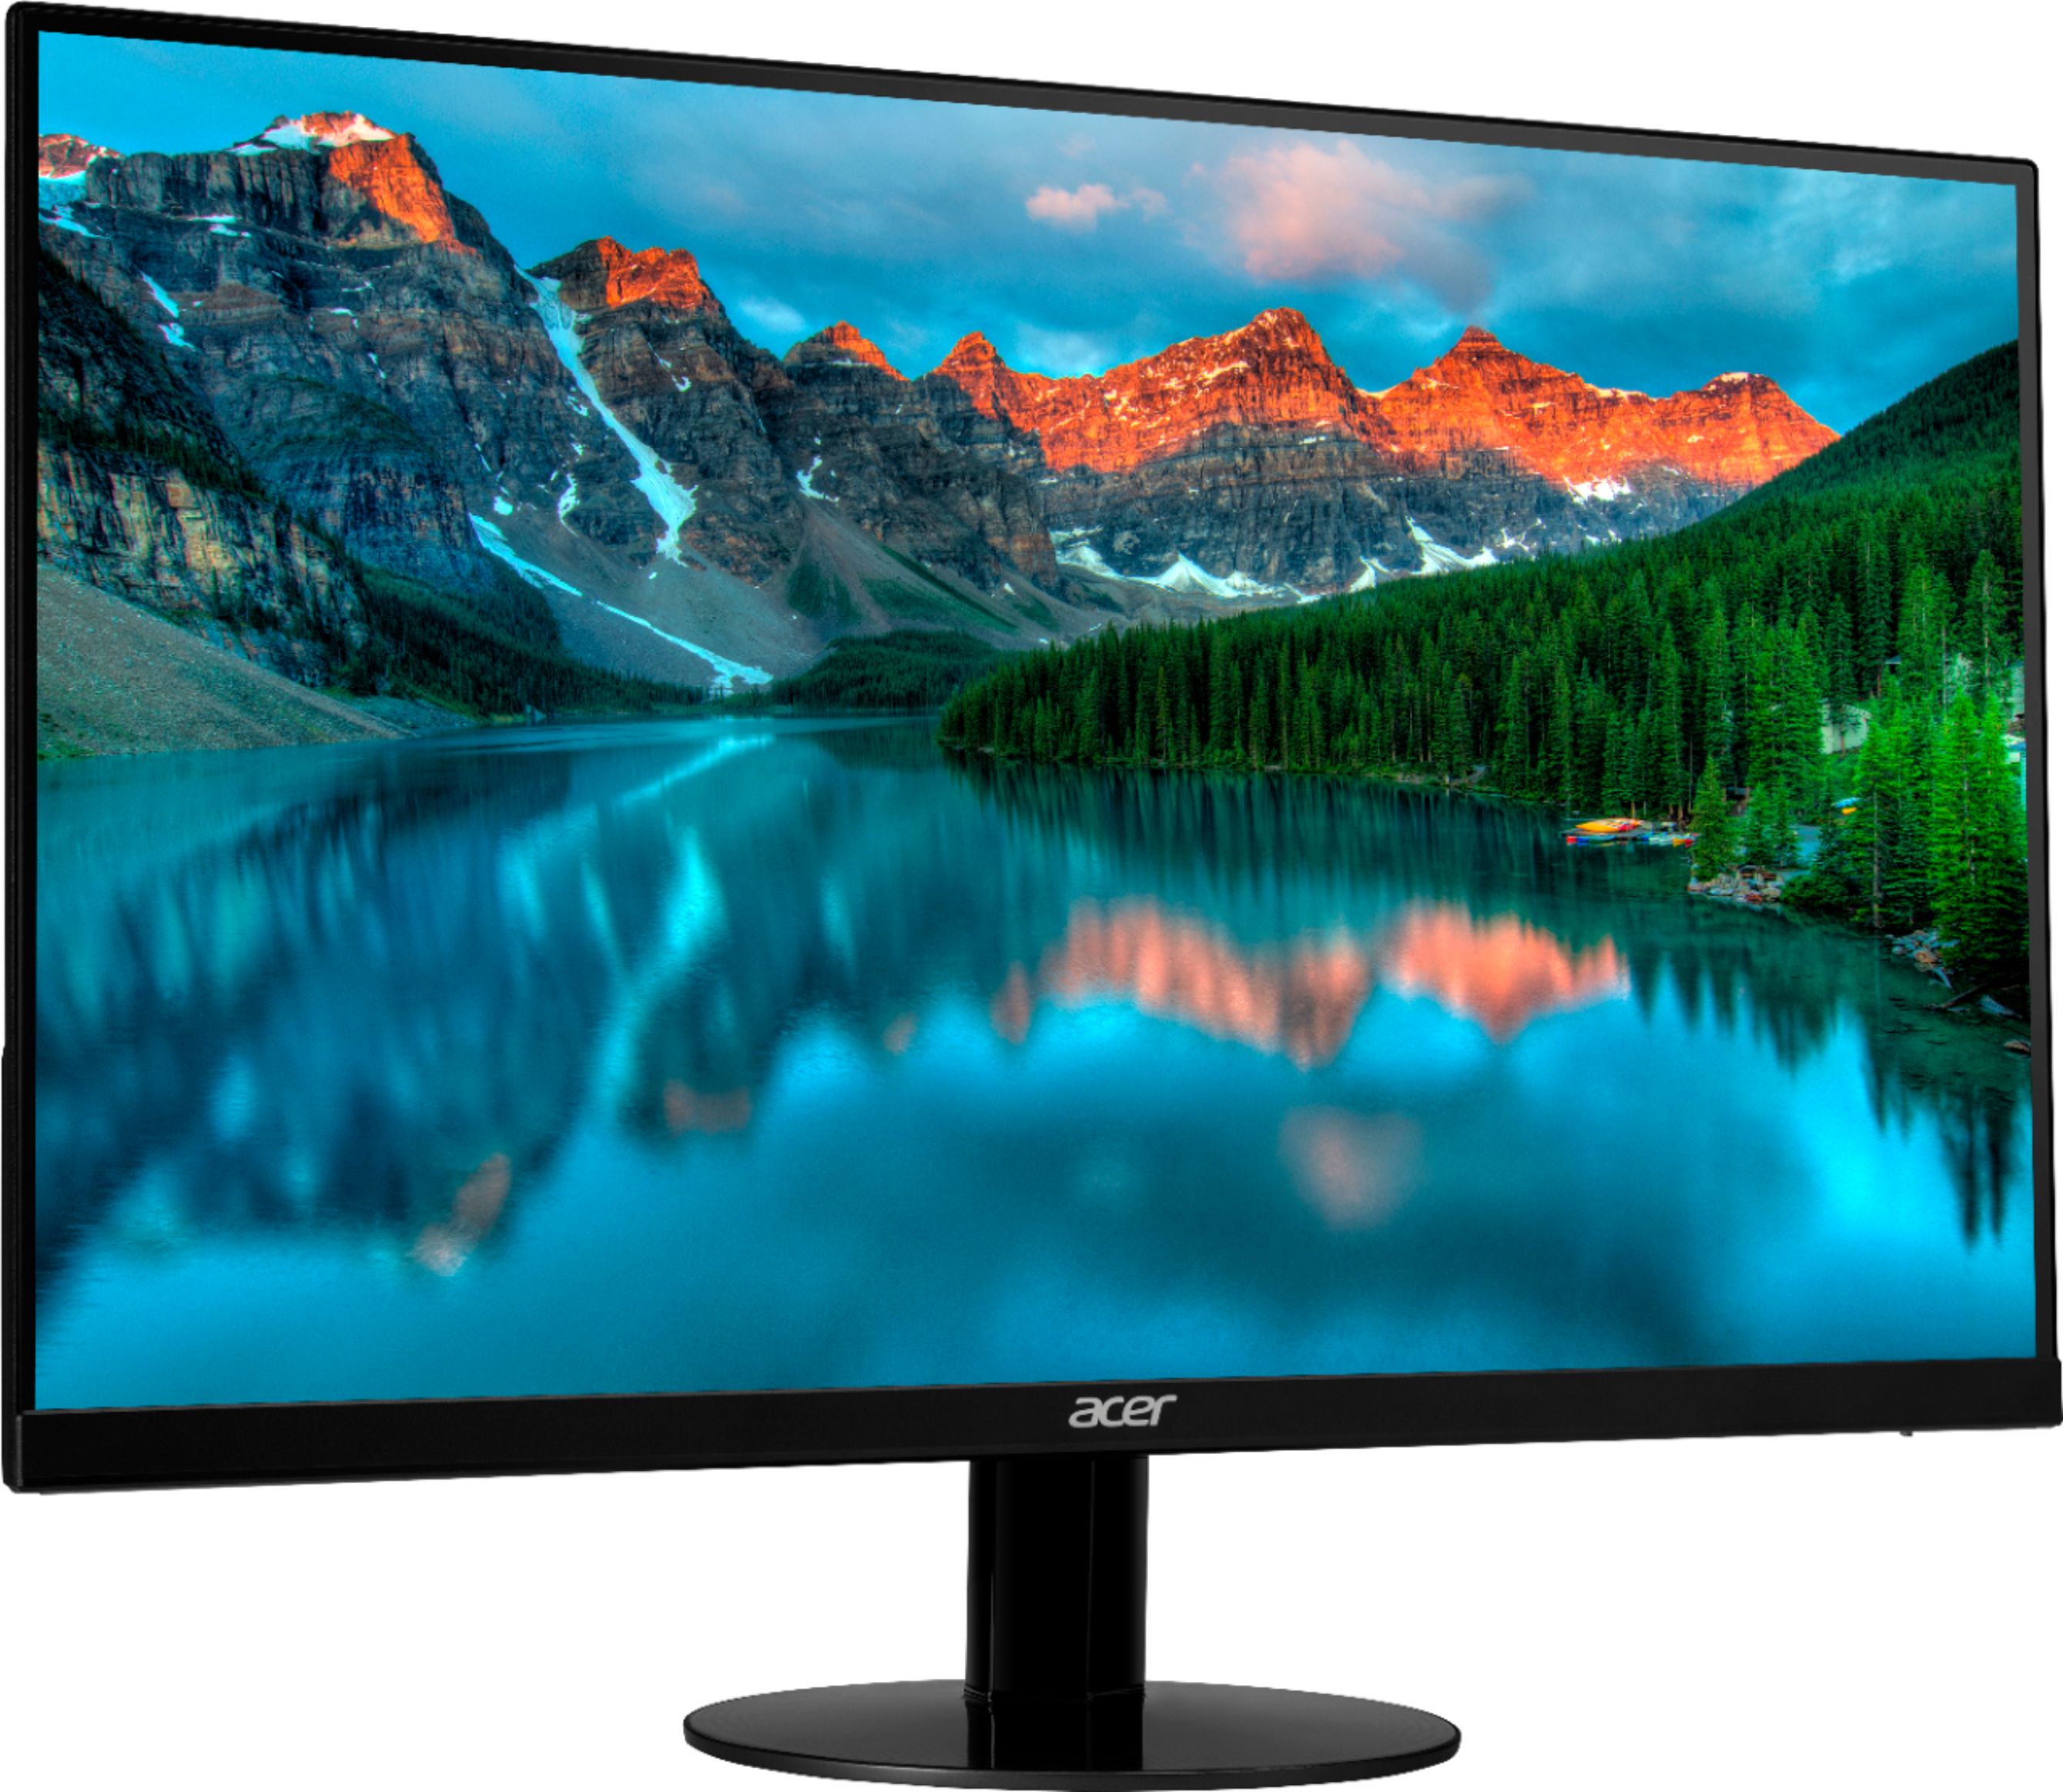 Angle View: Acer - Geek Squad Certified Refurbished SA230 23" IPS LED FHD Monitor - Black